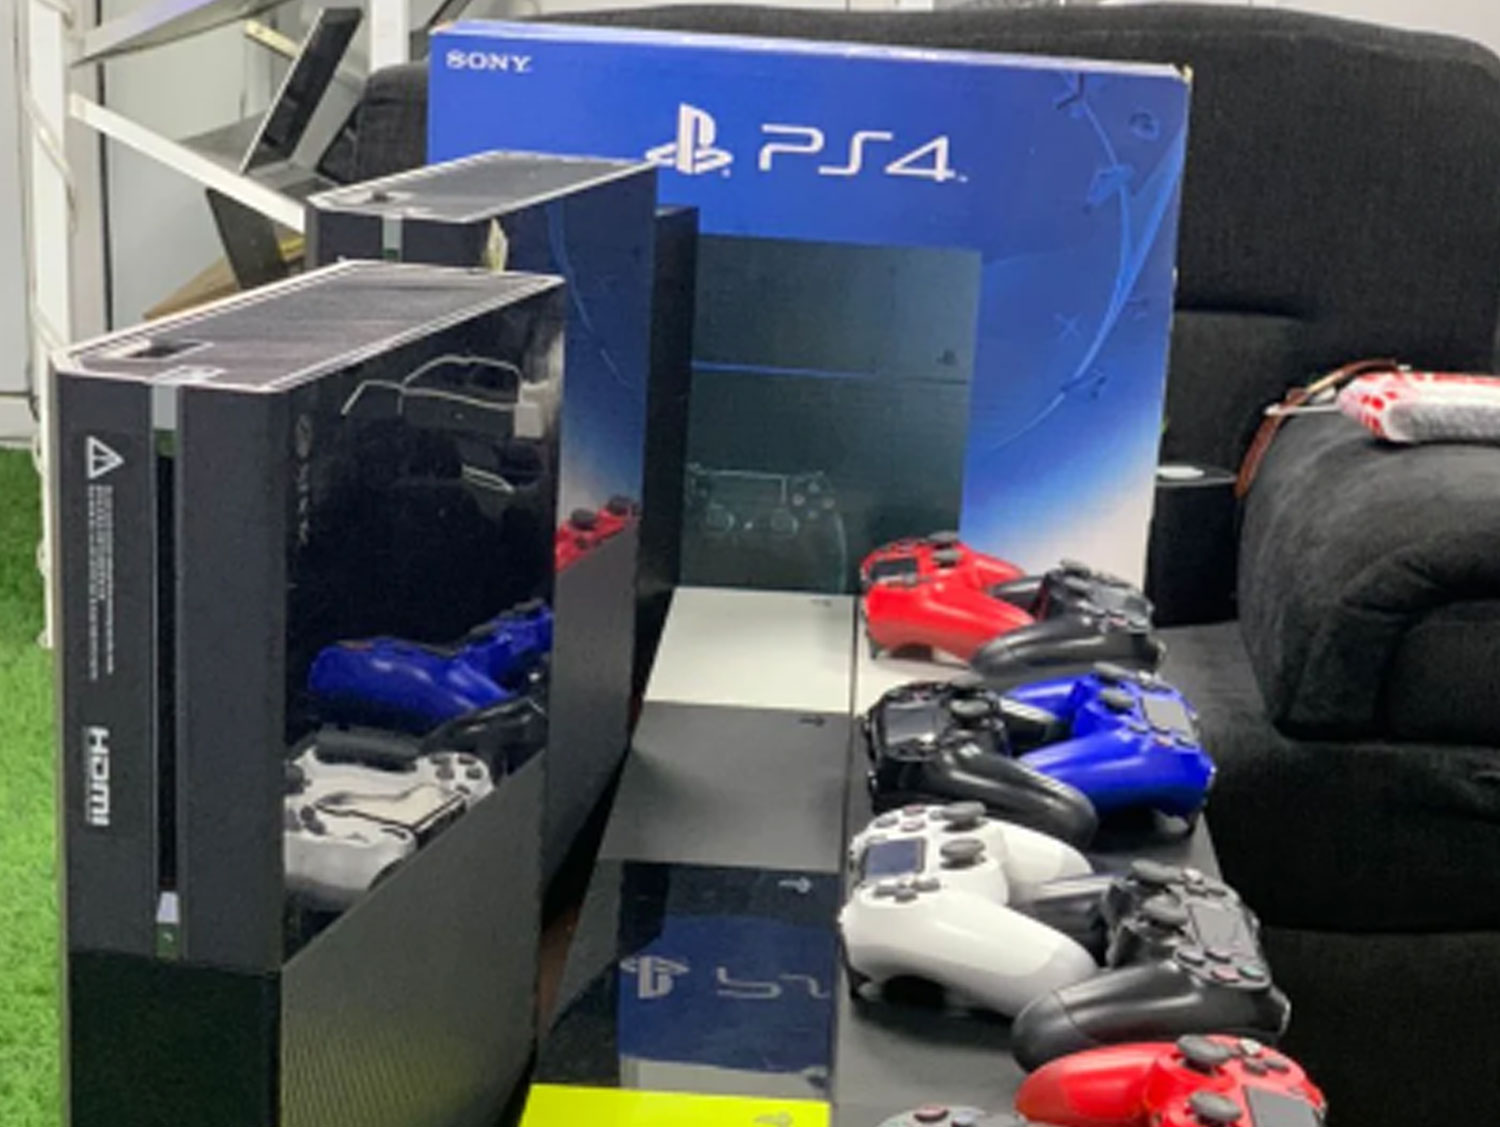 Sony PS4 Console Setup ready for Event Rental in Sri Lanka